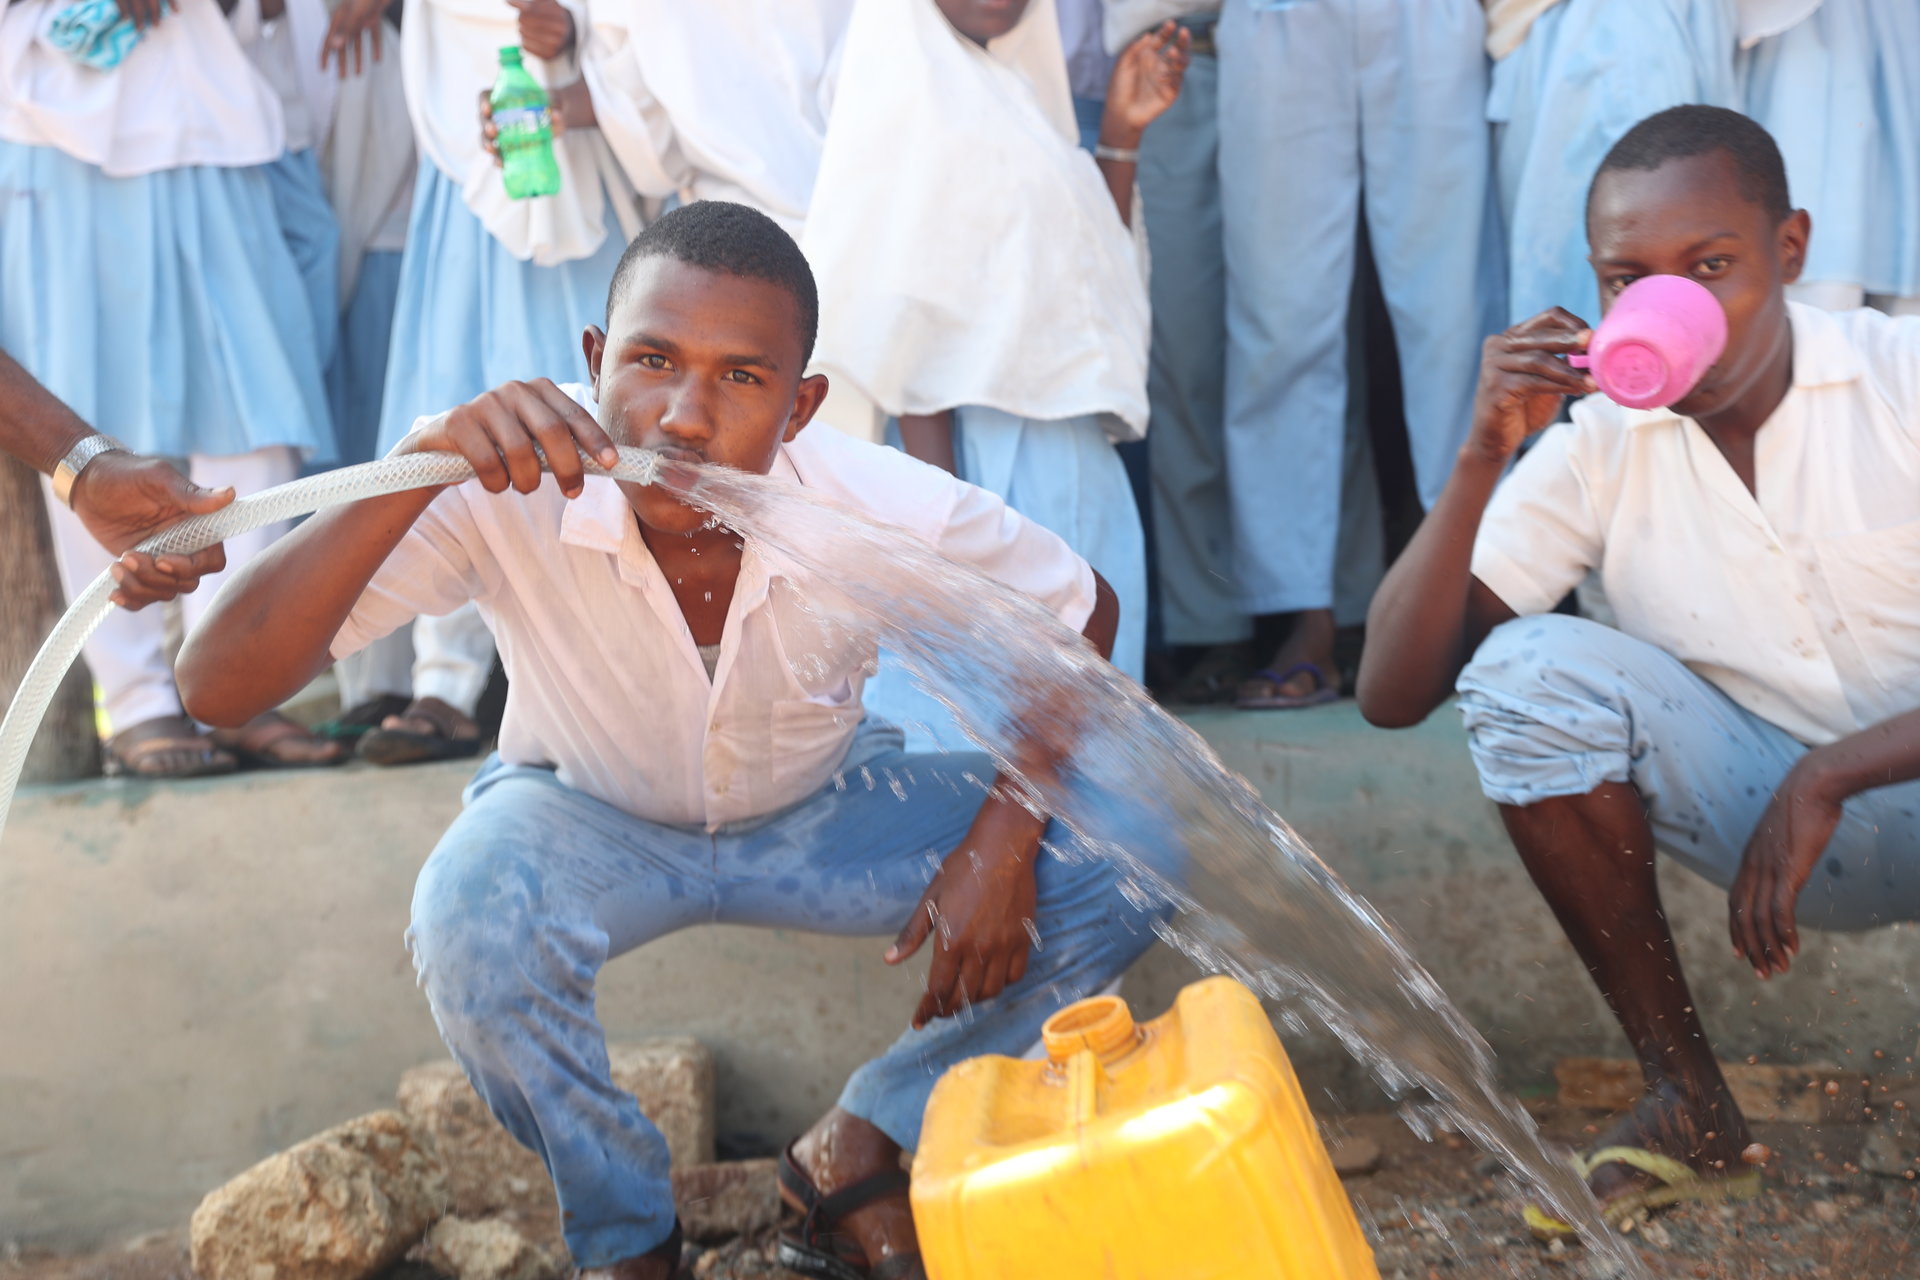 Introducing GivePower: Solar-powered System Treats Clean Drinking Water for 25,000 People per Day